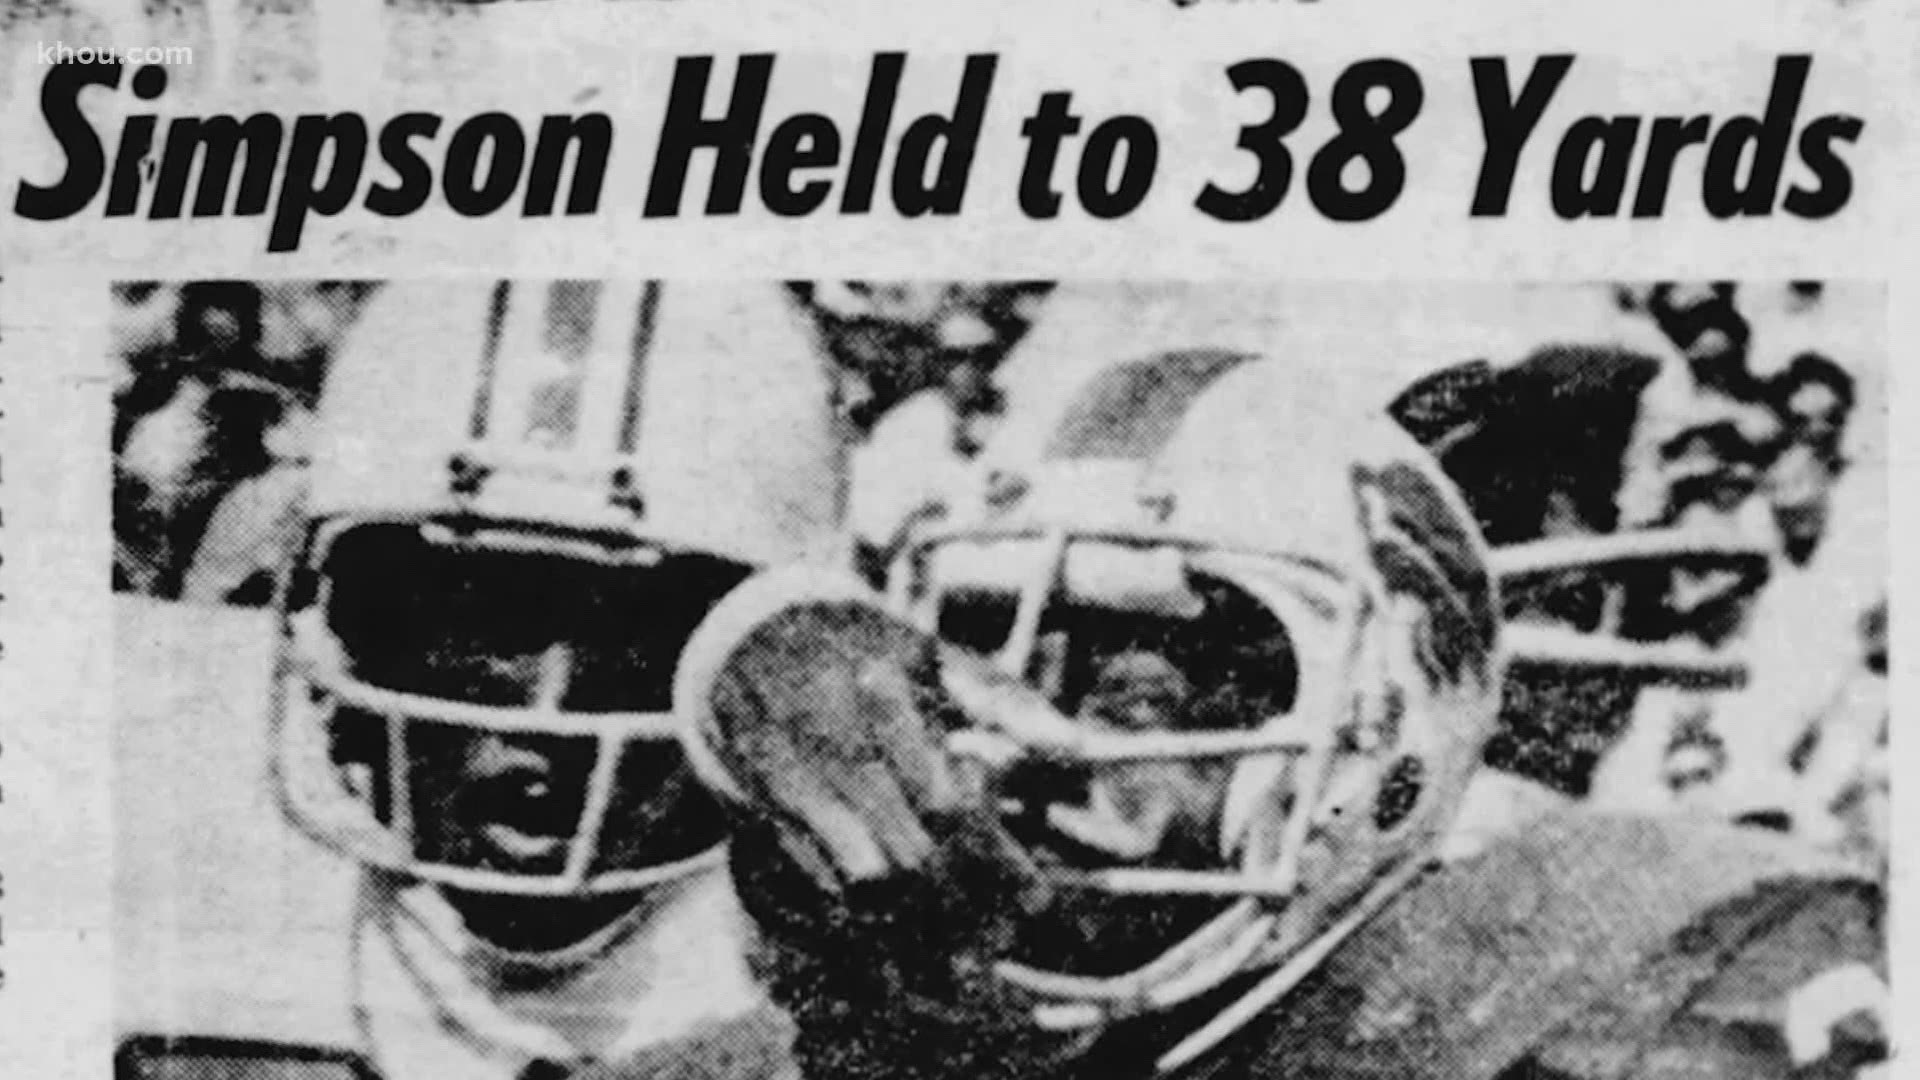 He was one of the greatest running backs in the history of pro football. But O.J. Simpson was also anything but great against the Houston Oilers.